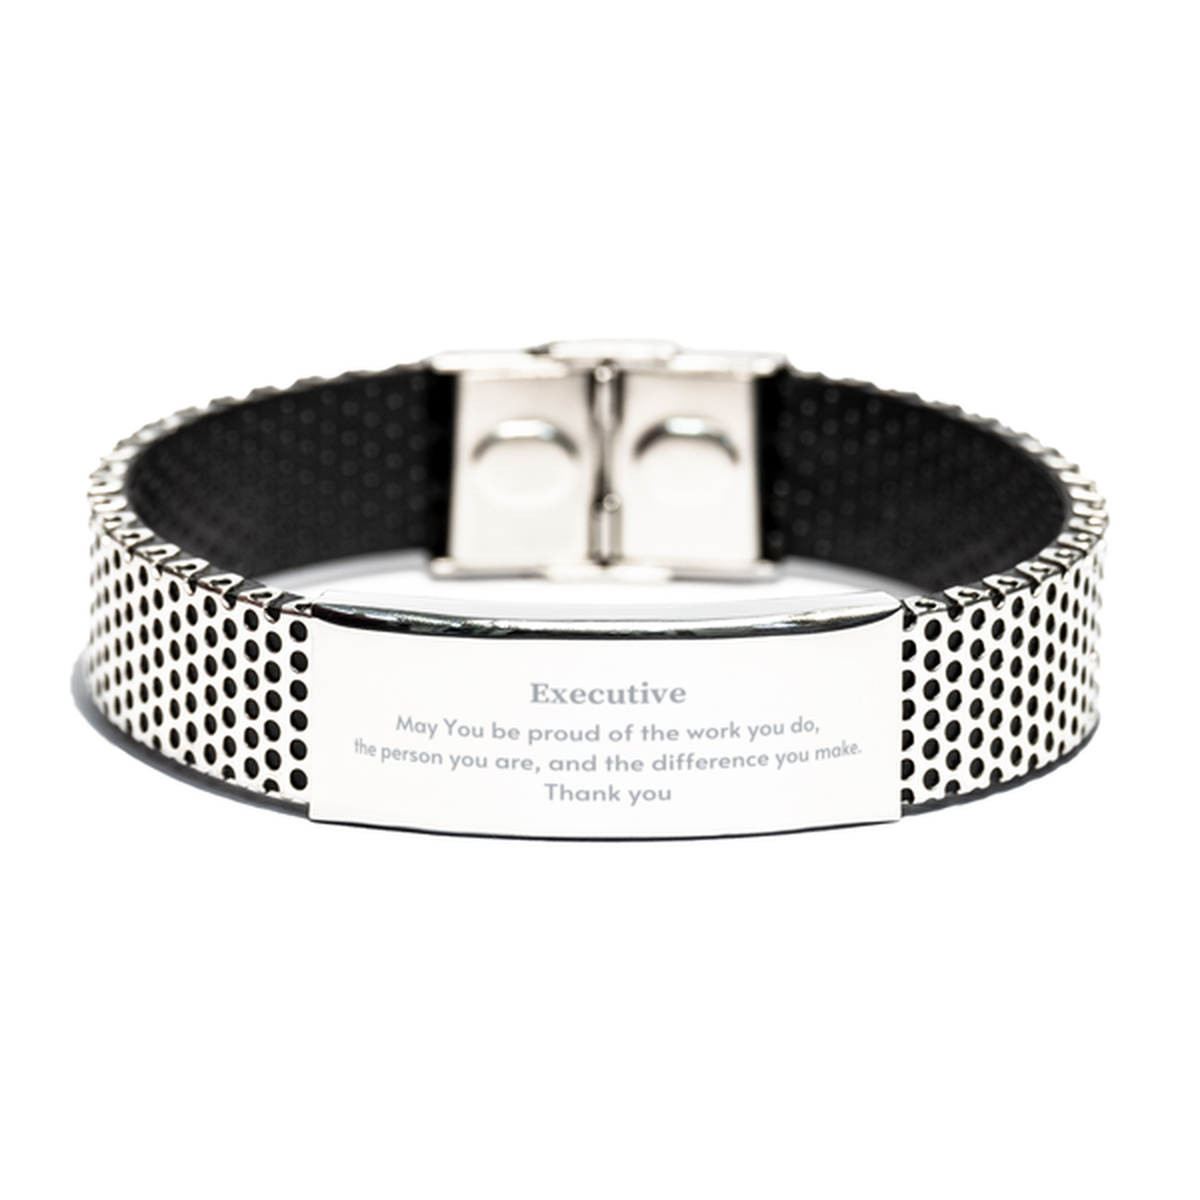 Heartwarming Stainless Steel Bracelet Retirement Coworkers Gifts for Executive, Executive May You be proud of the work you do, the person you are Gifts for Boss Men Women Friends